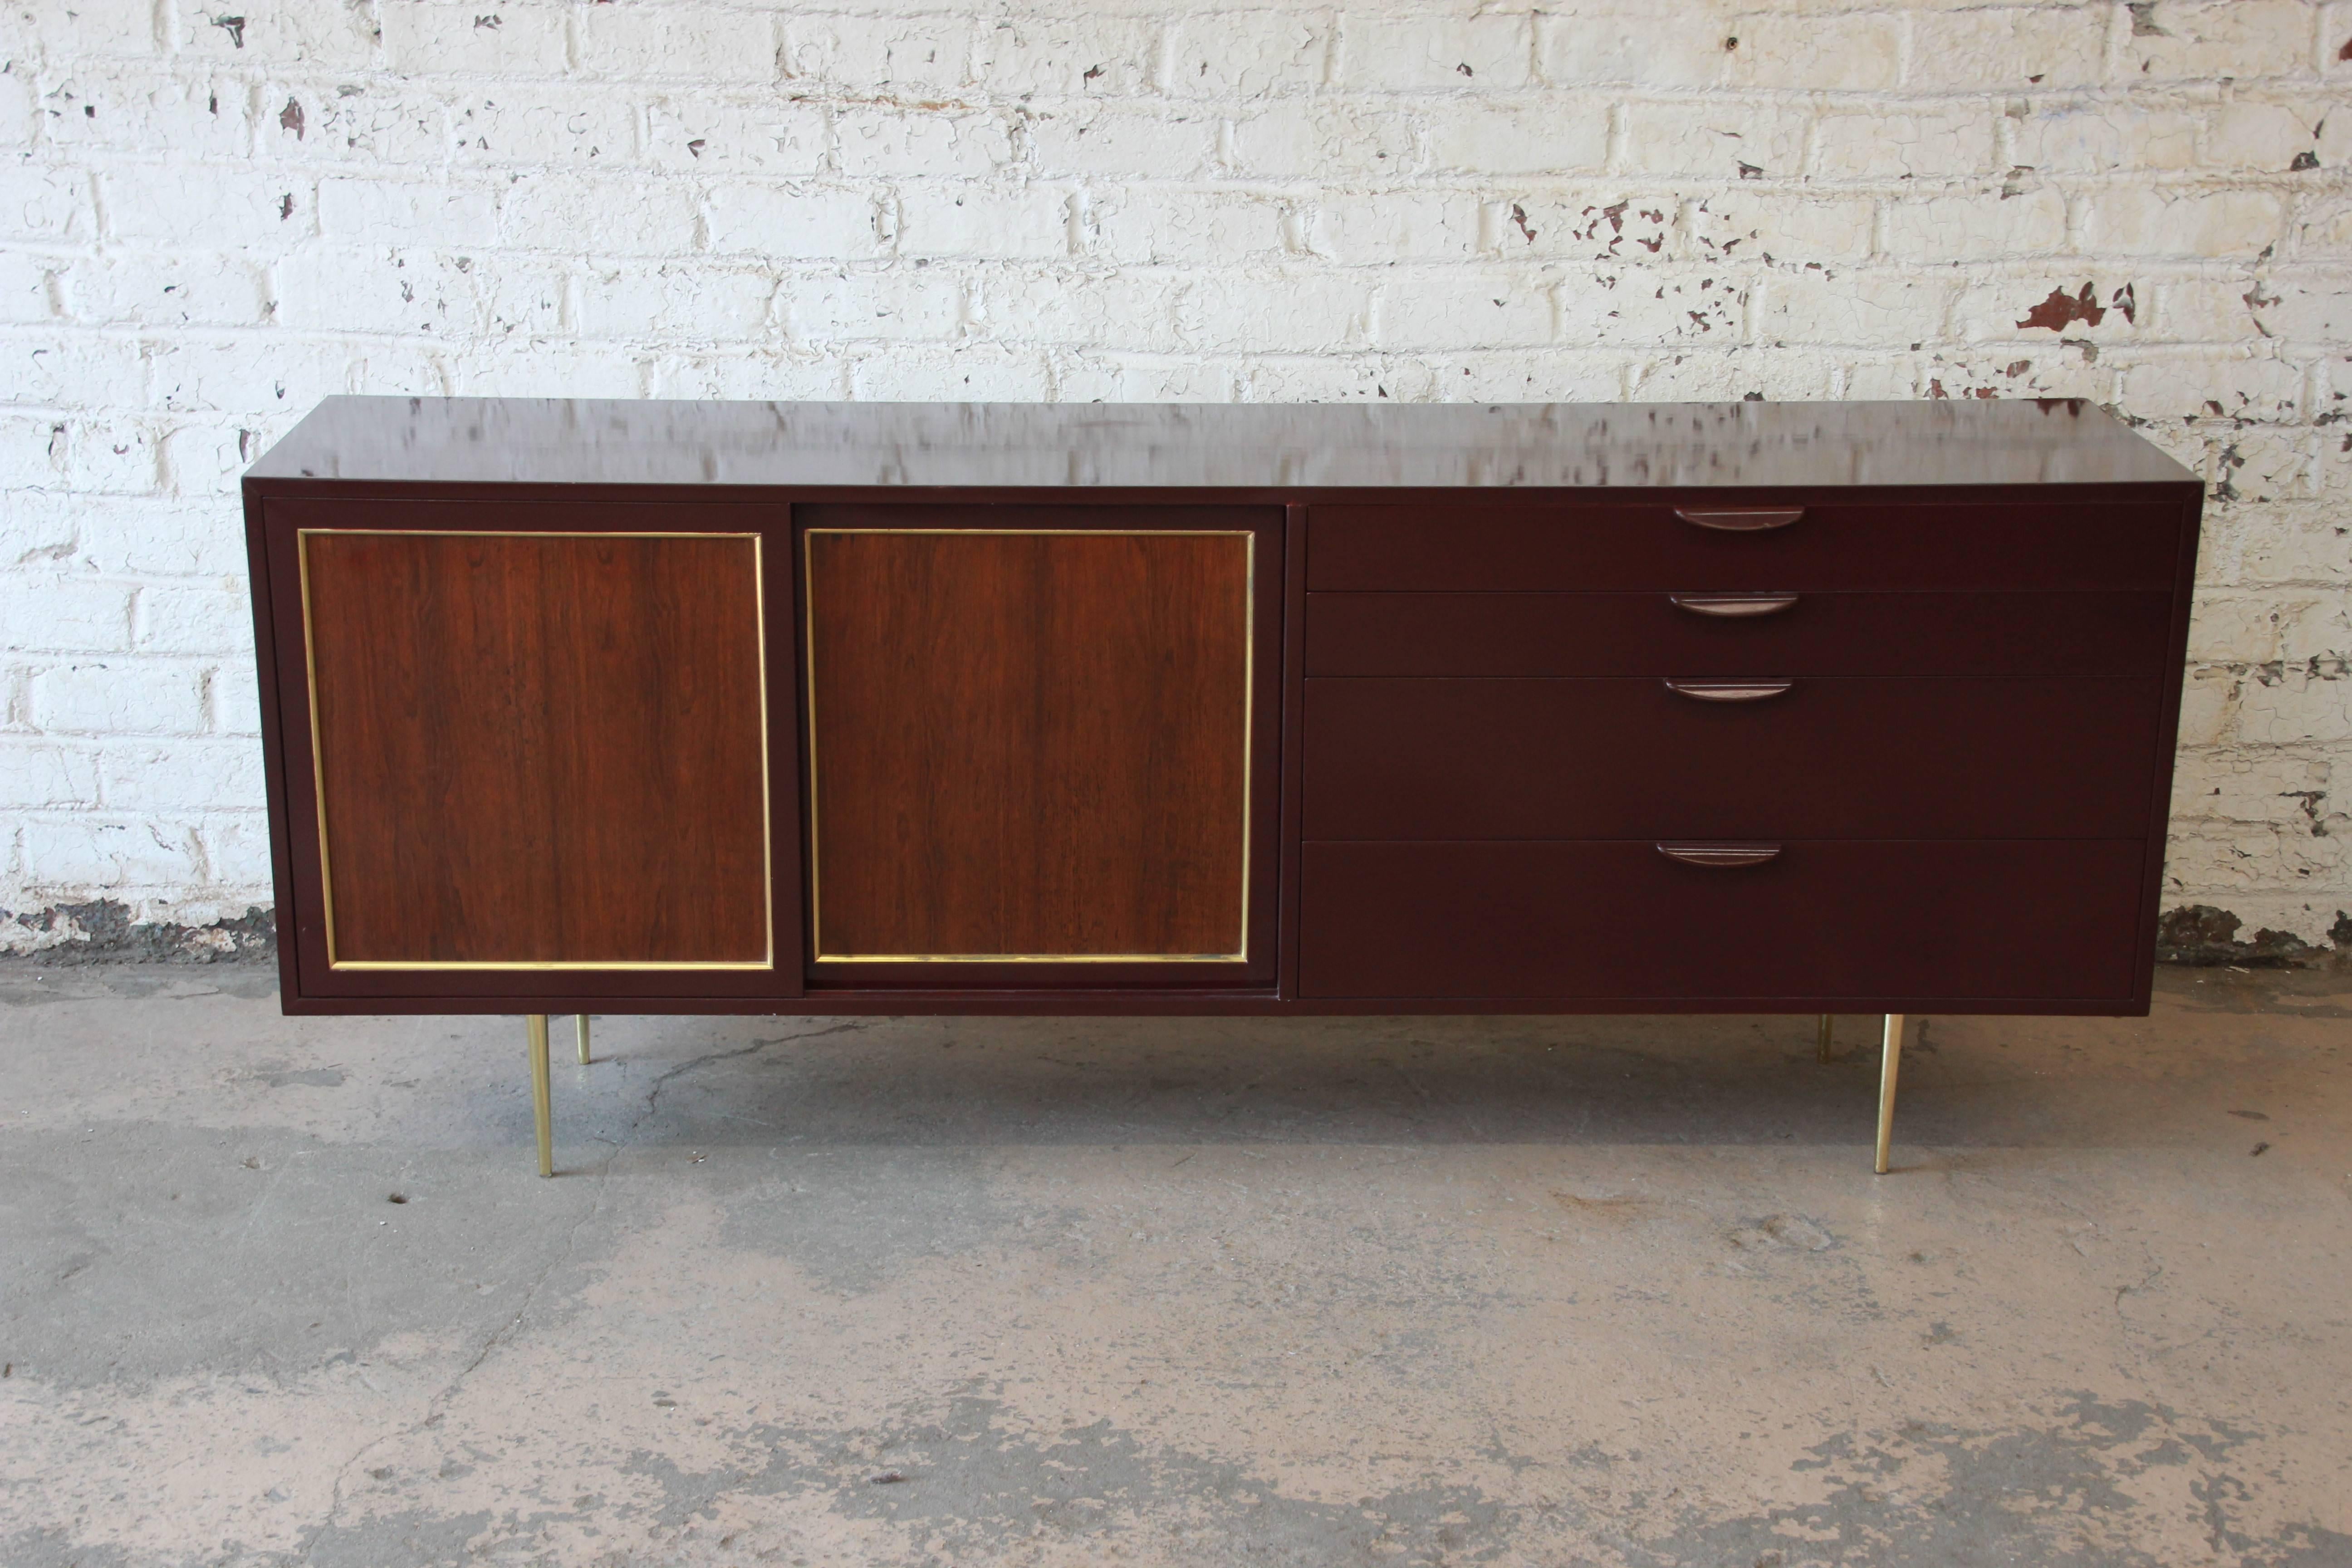 A sleek and stylish Mid-Century Modern credenza or dresser designed by Harvey Probber. The credenza features the original burgundy lacquered case, with sliding rosewood doors. The brass trim and slim brass feet give the credenza a sophisticated and